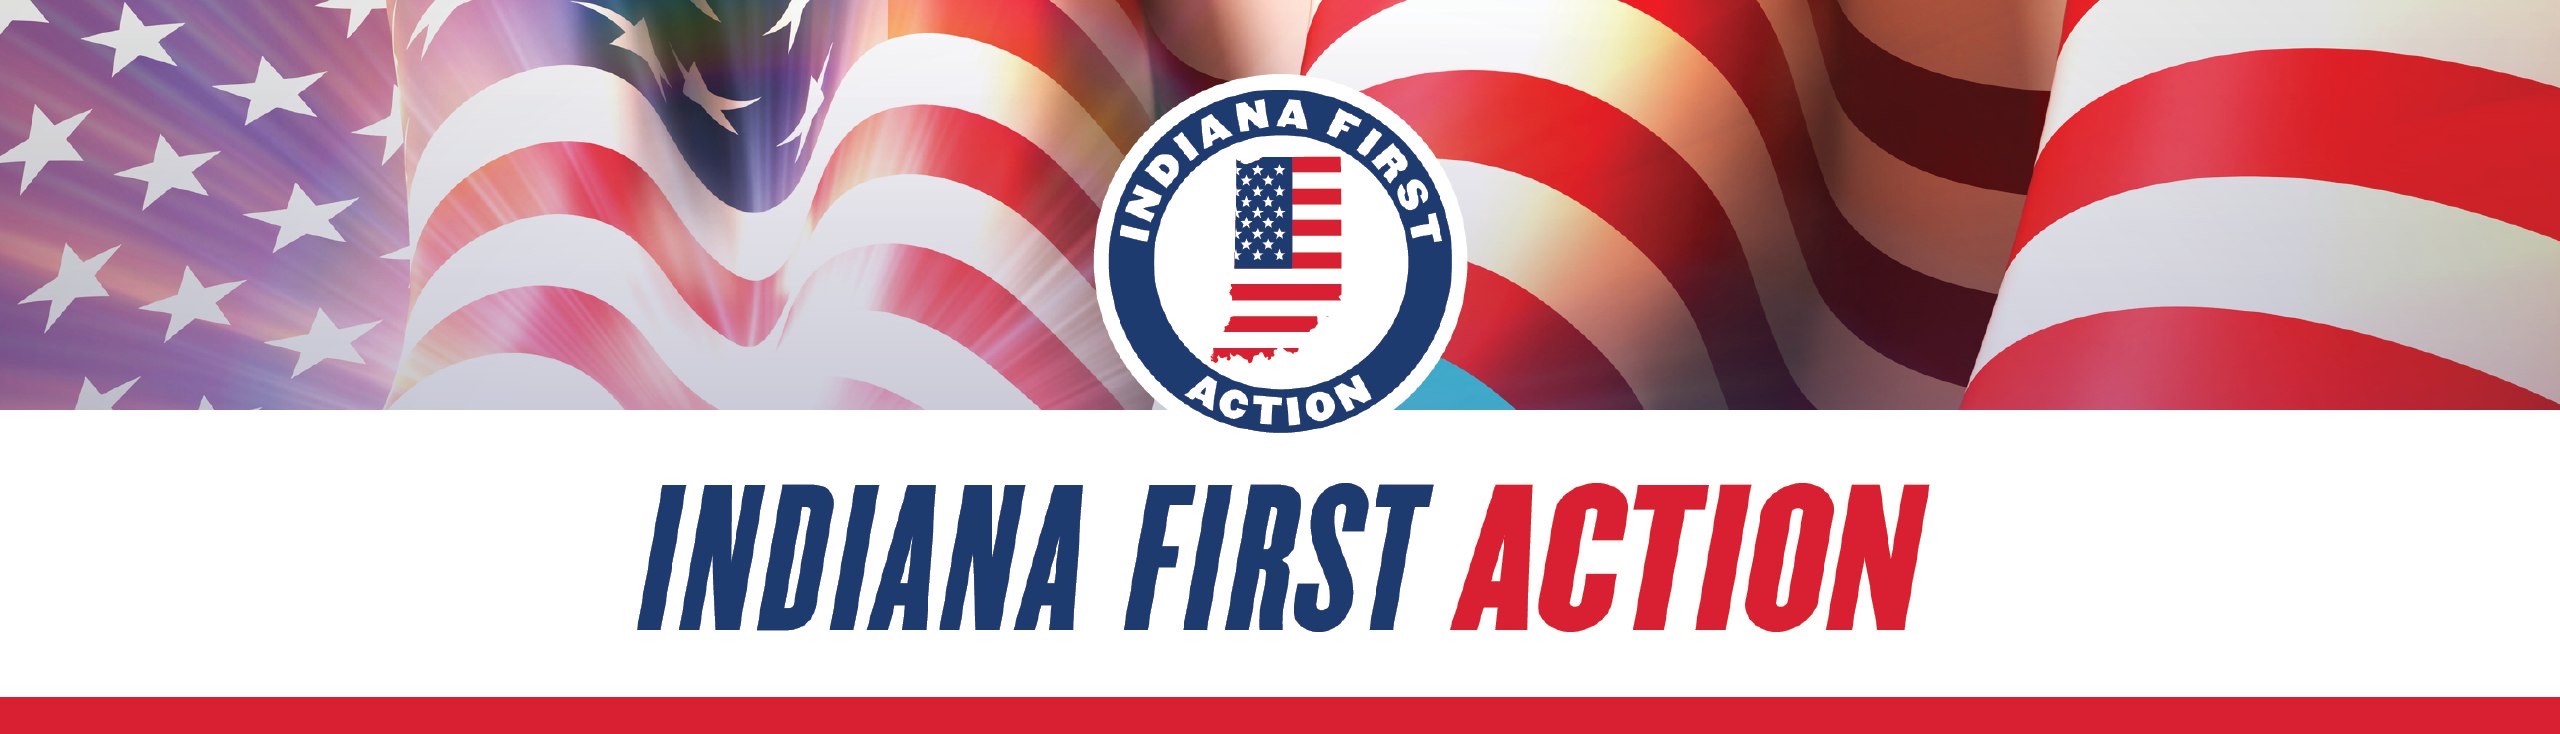 ERIC Shared with Third Party - Indiana First Action